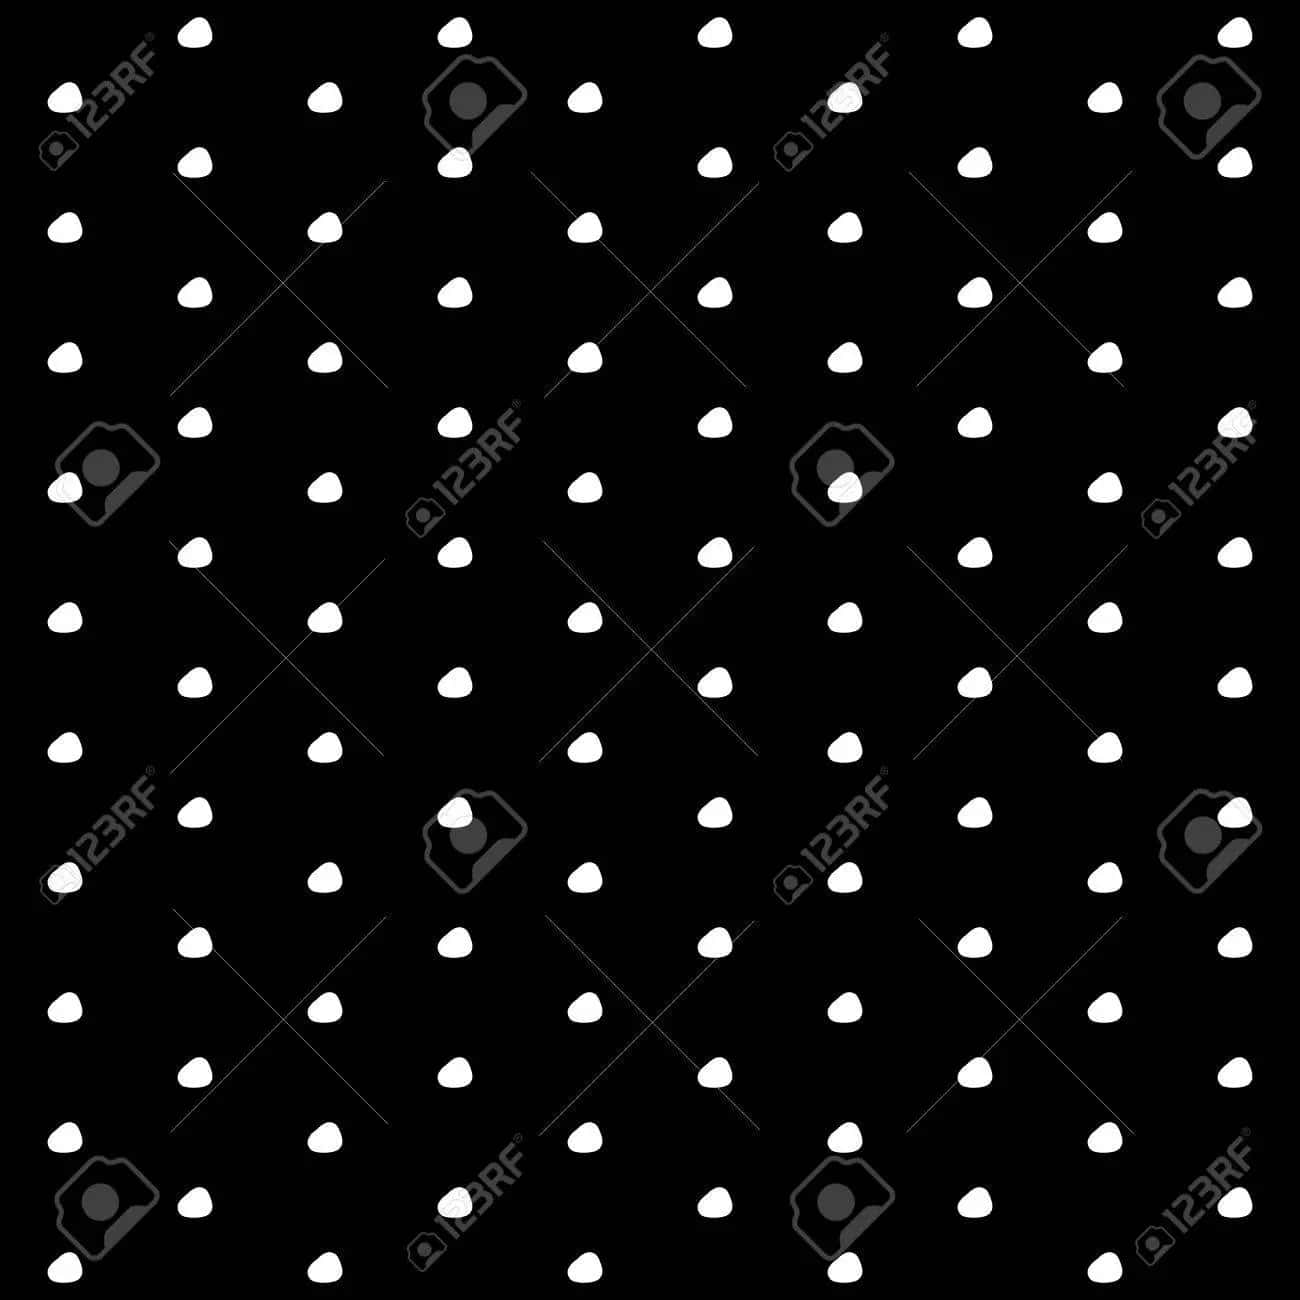 White Dots On Black Background Stock Vector Background